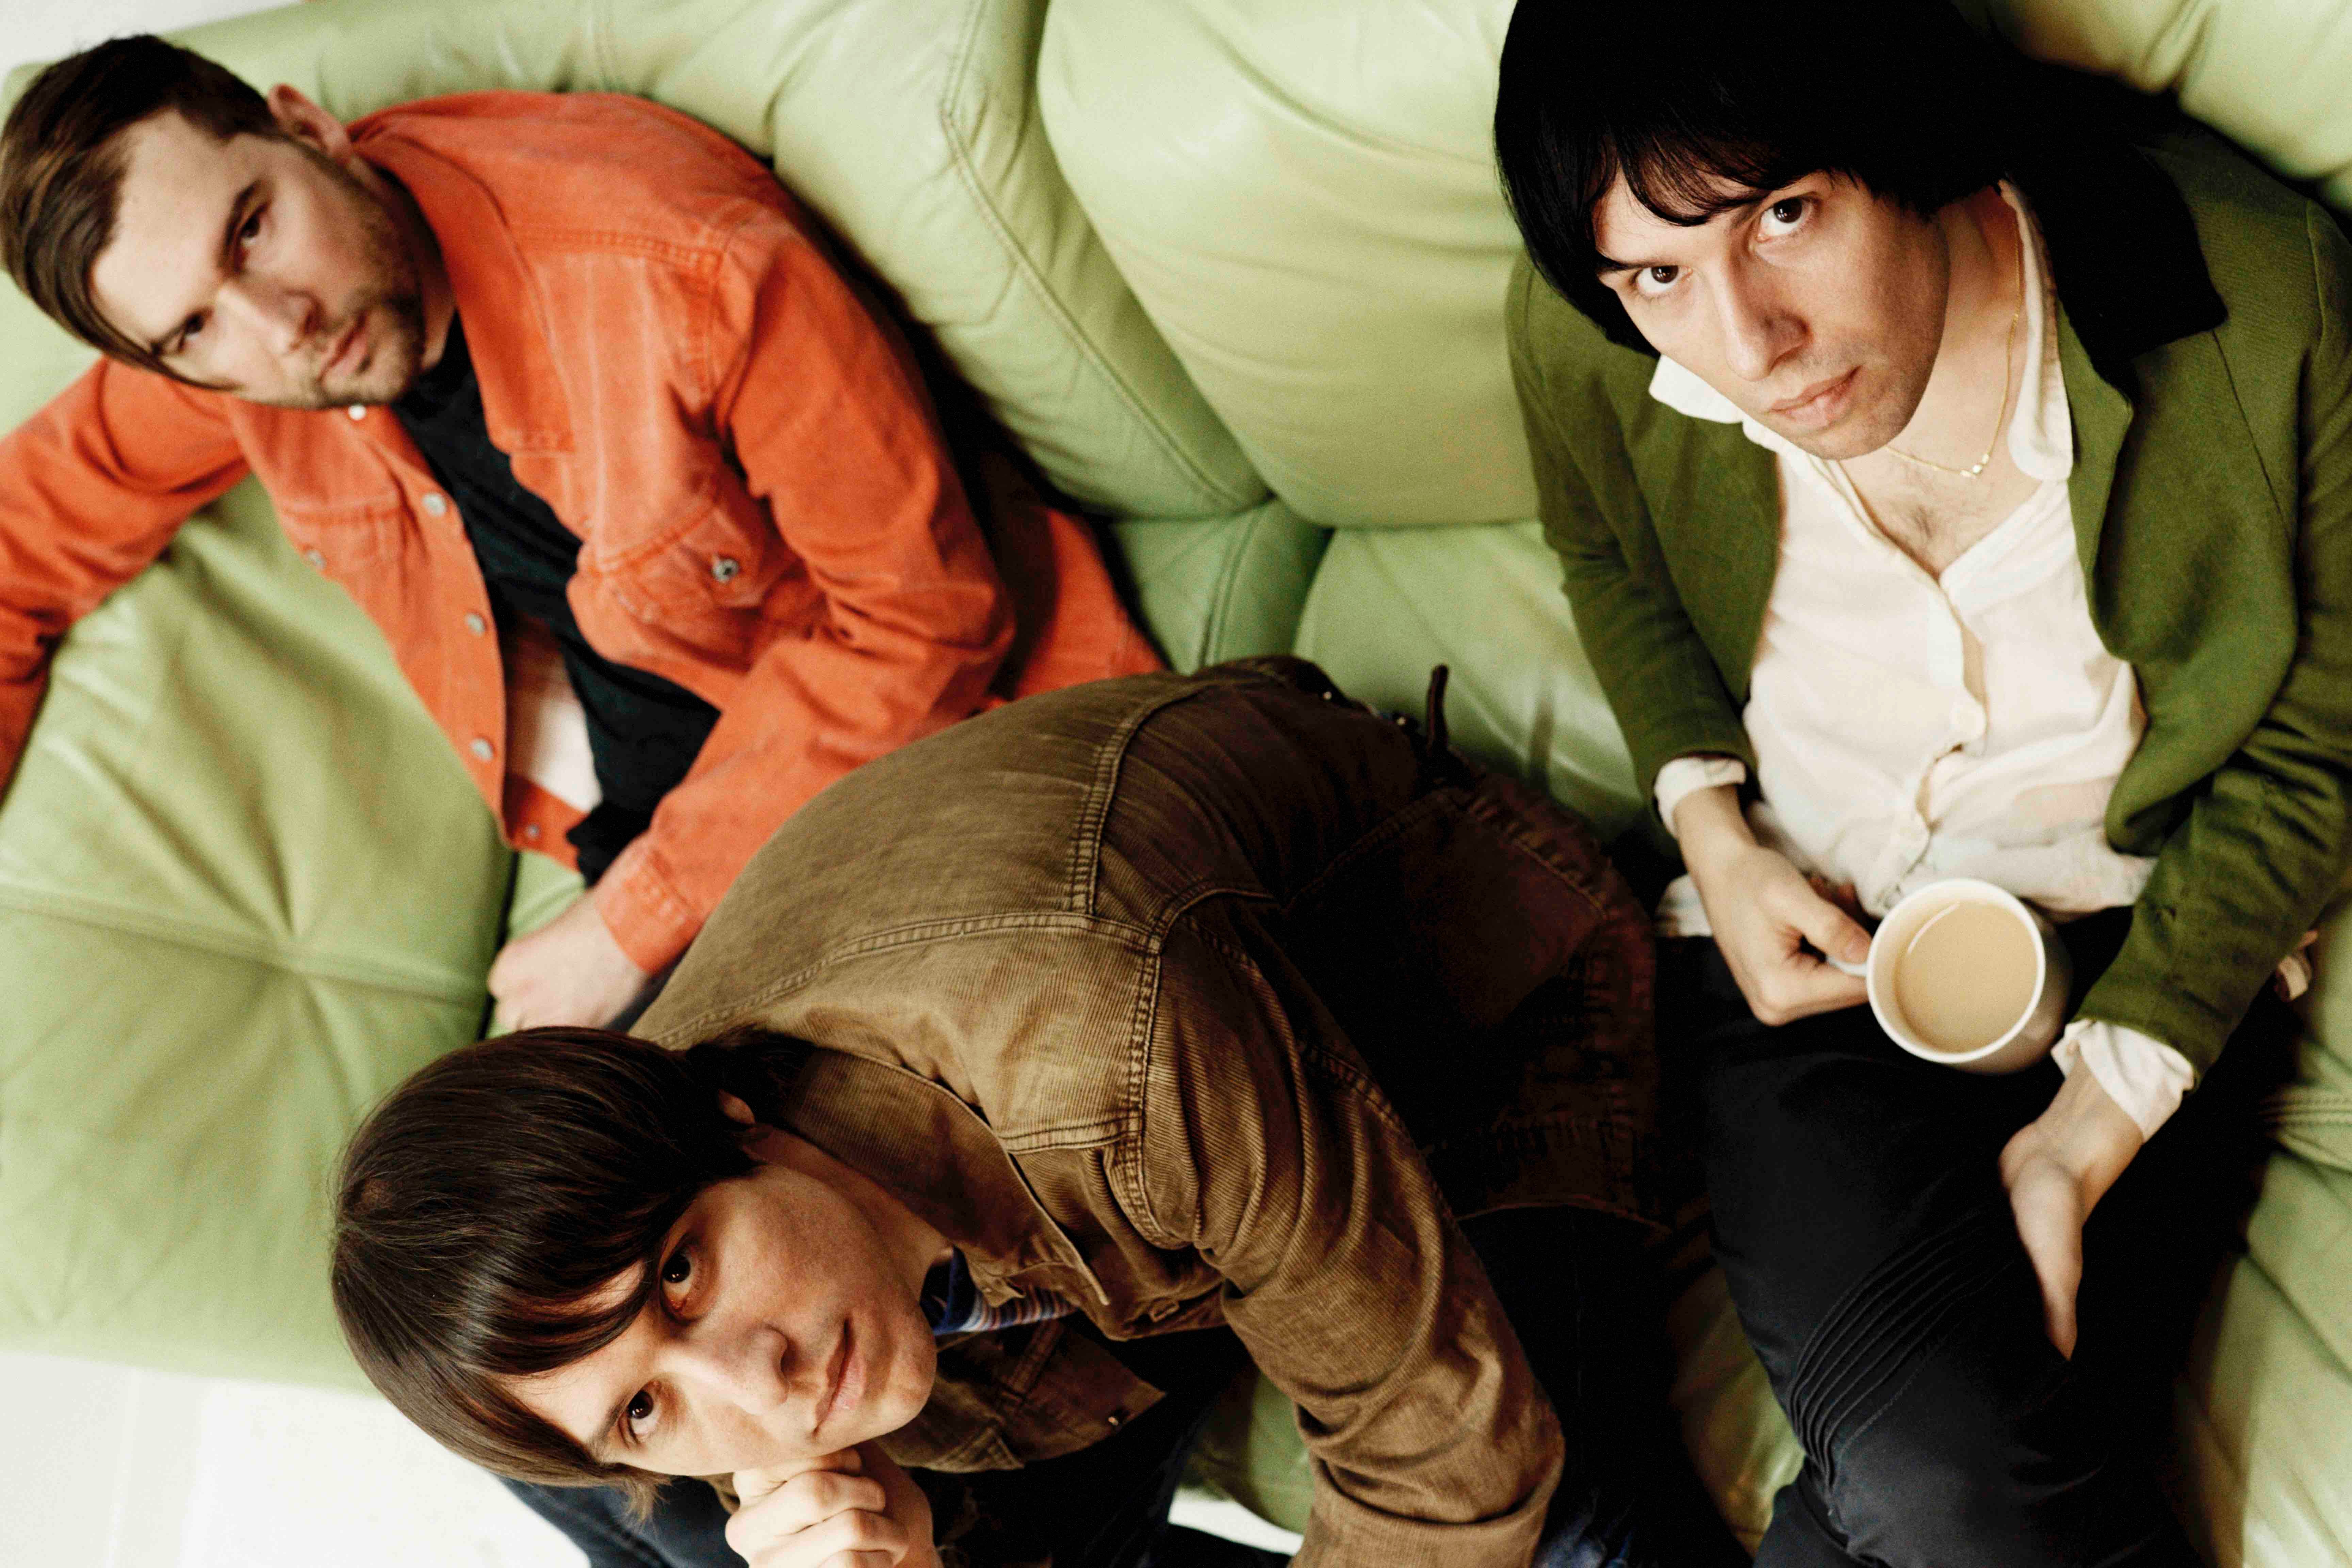 The Cribs: ‘The first half of the 2000s were really interesting’